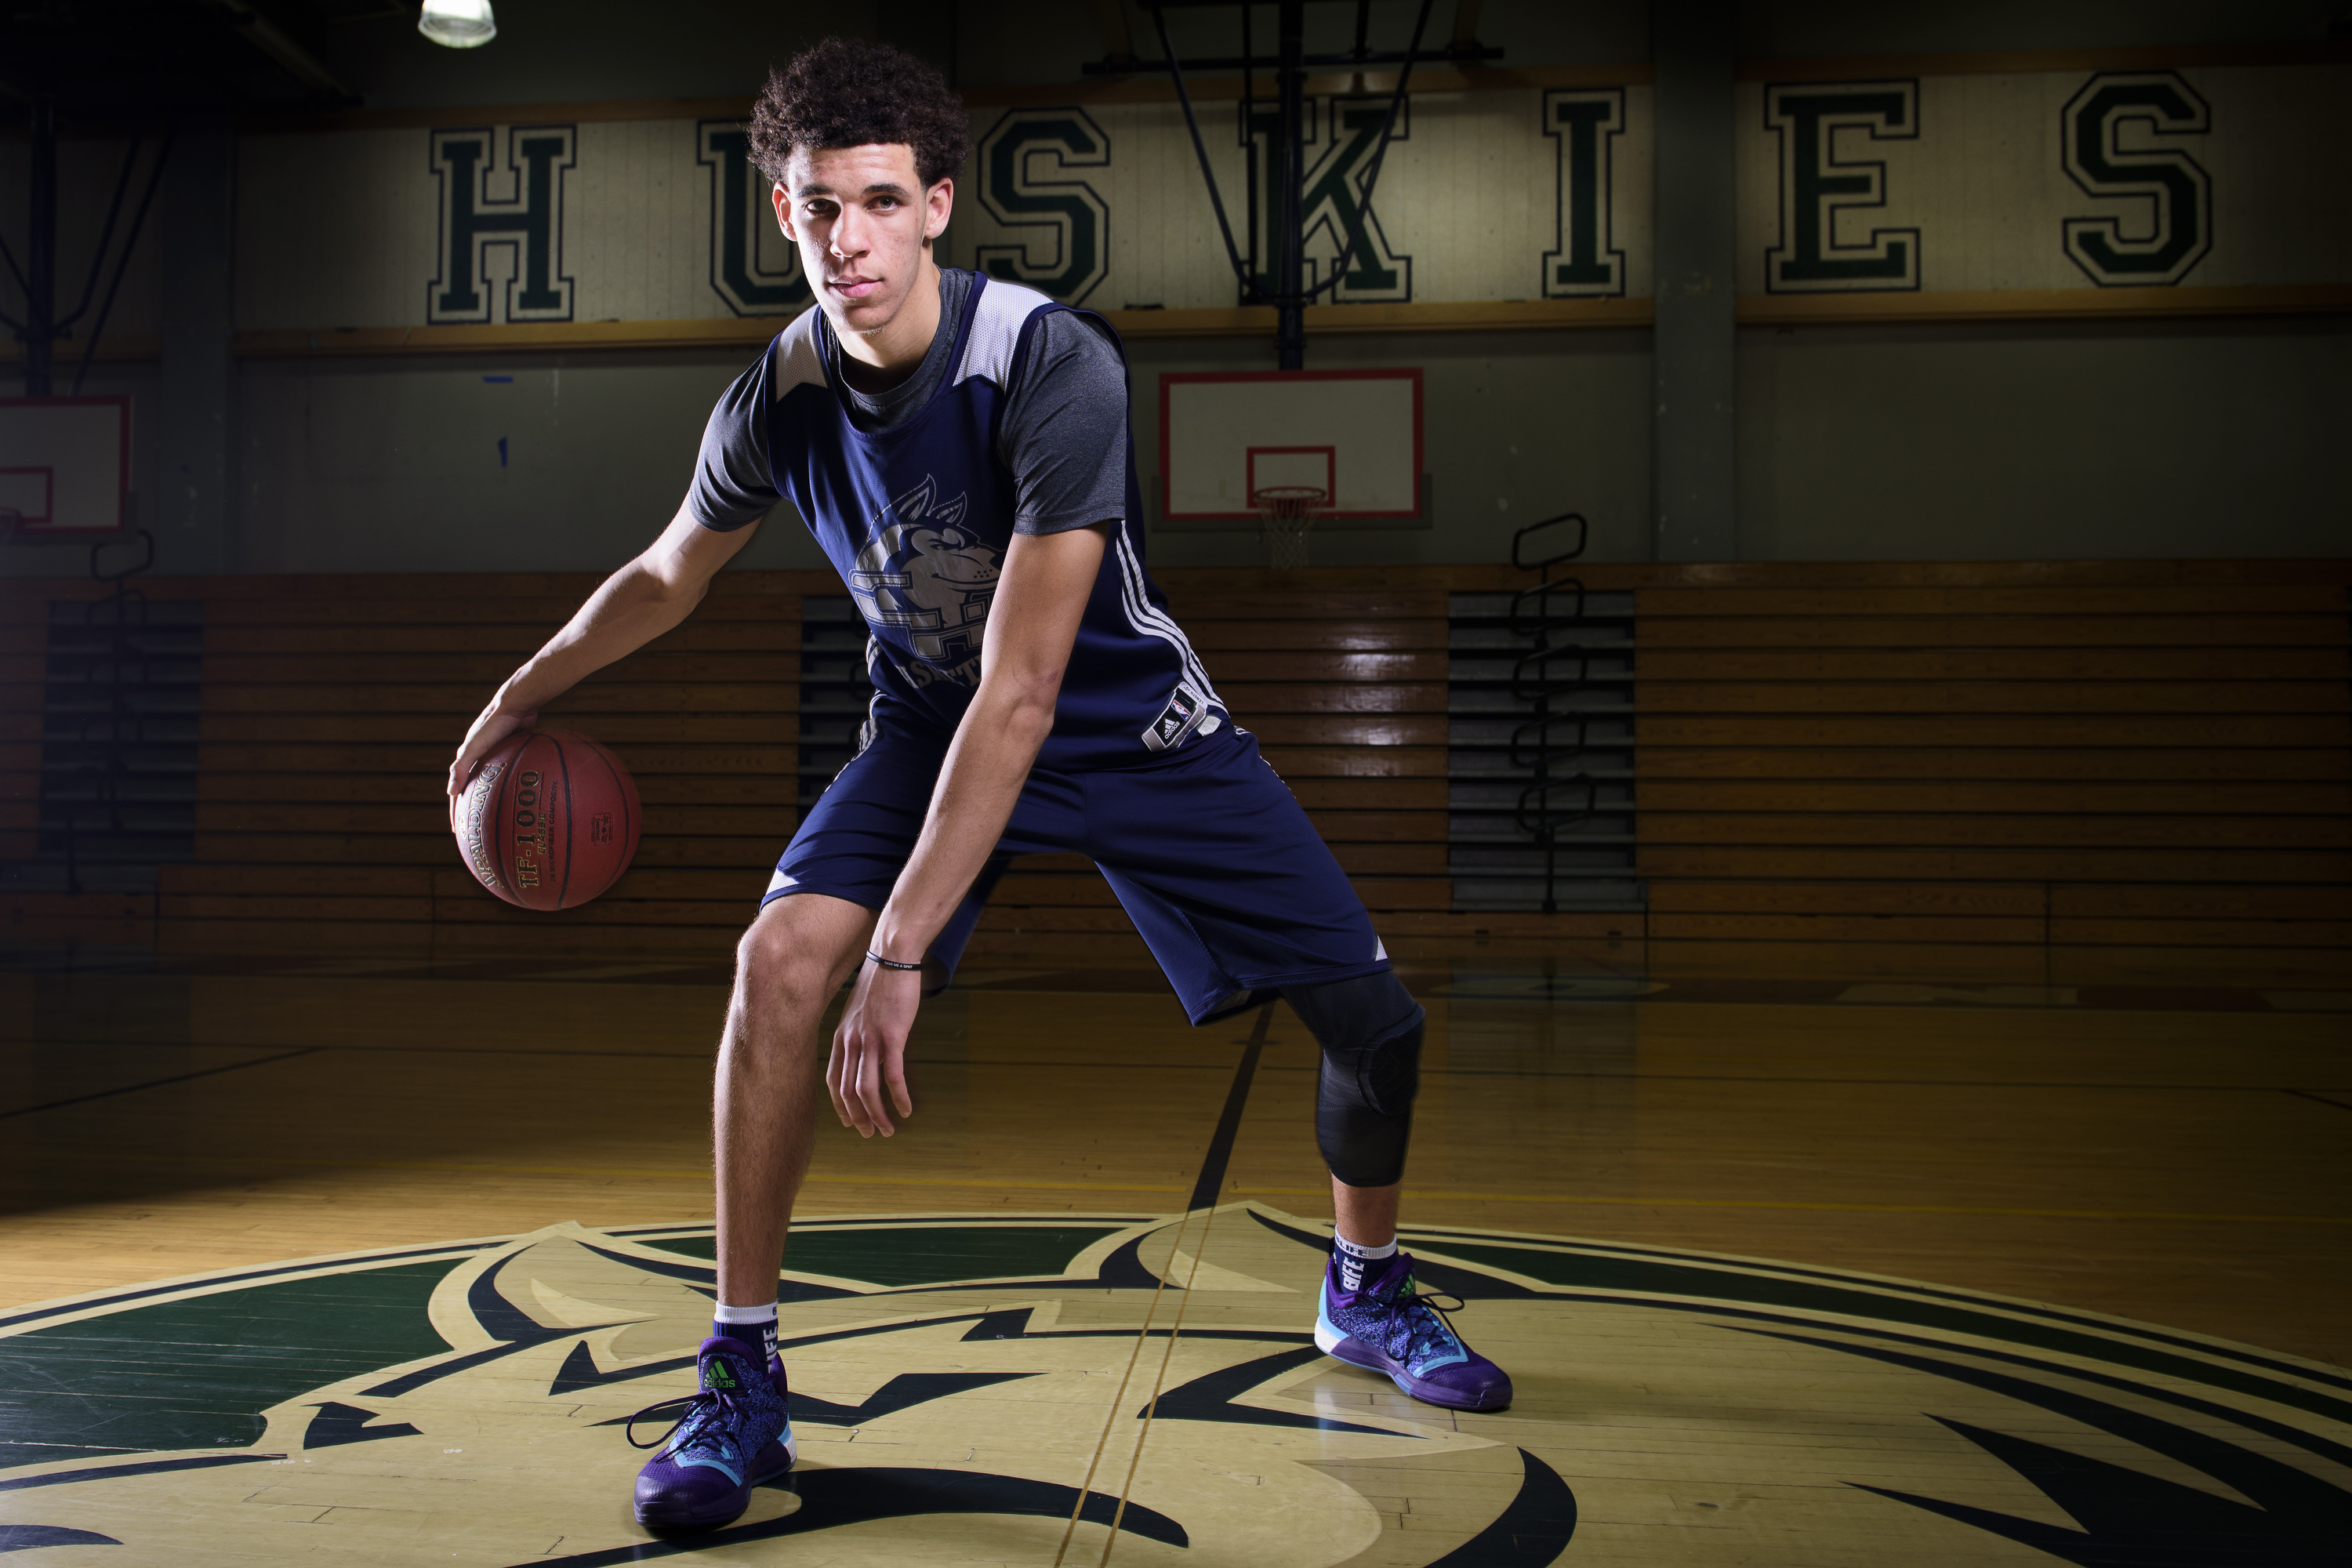 Lonzo Ball of Chino Hills (Calif.) is the American Family Insurance ALL-USA Player of the Year for boys basketball (Photo: Kelvin Kuo, USA TODAY Sports)